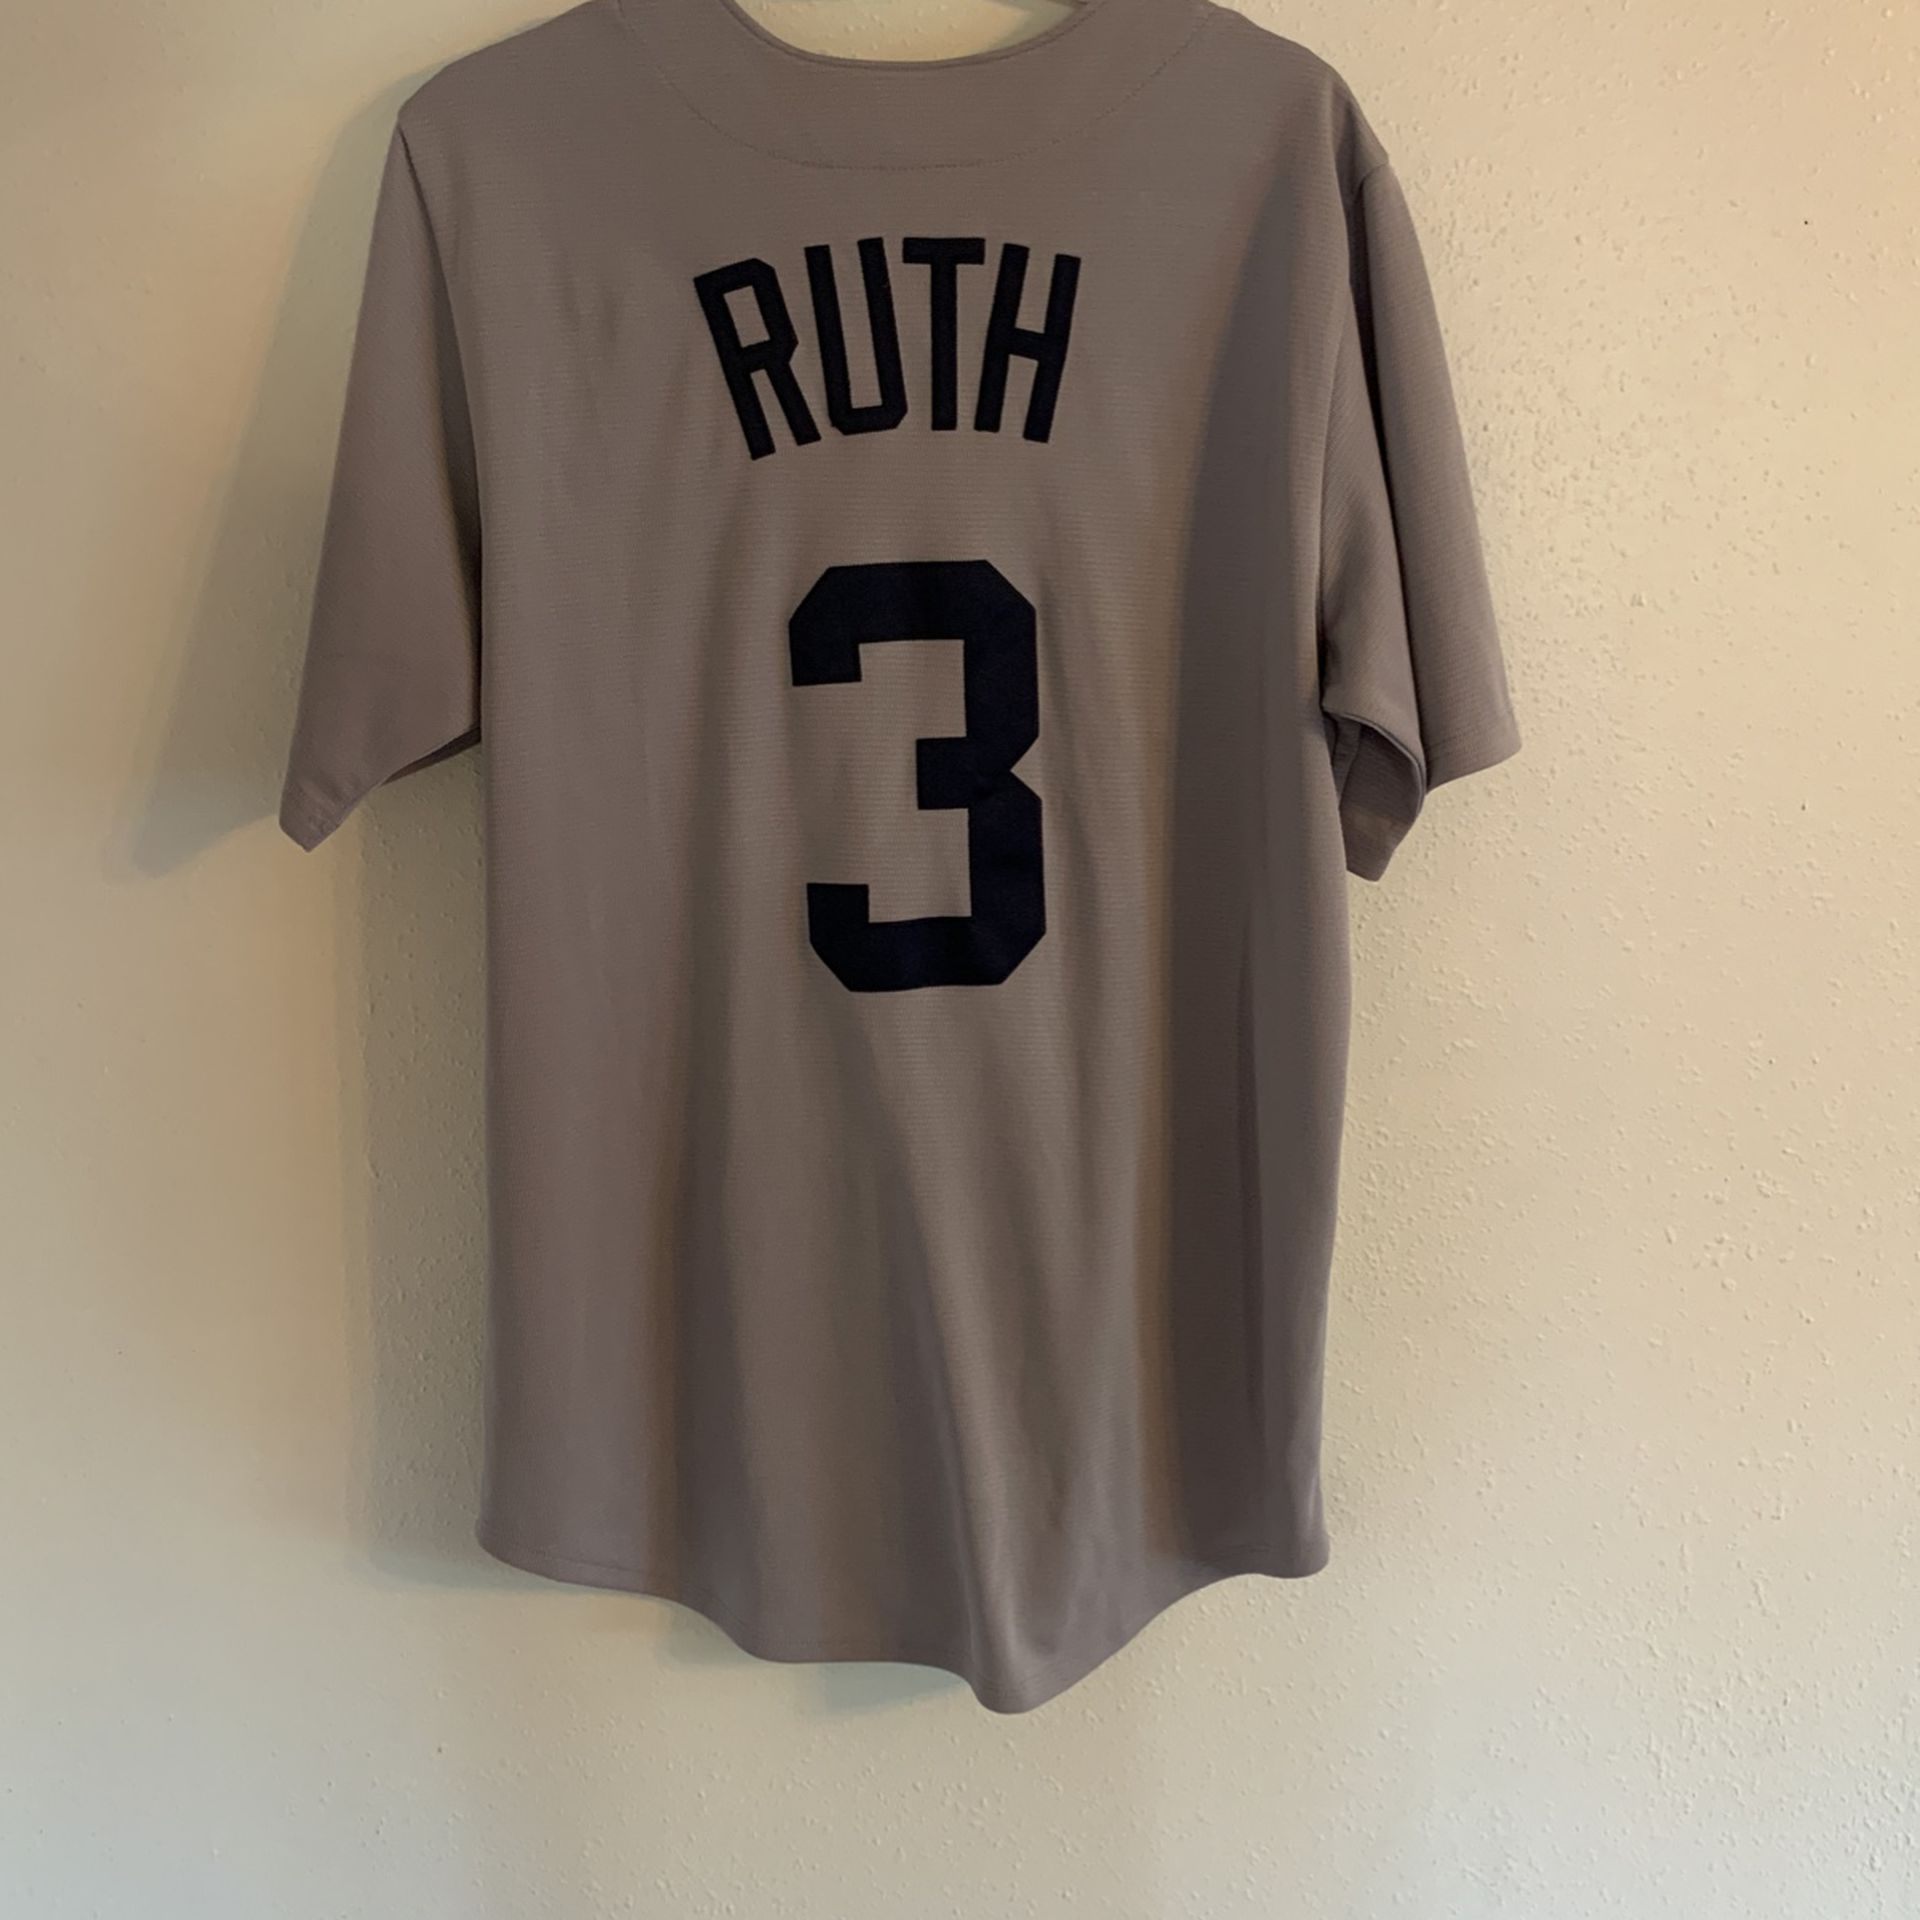 Babe Ruth New York Yankees Cooperstown Collection 3/4 T-Shirt